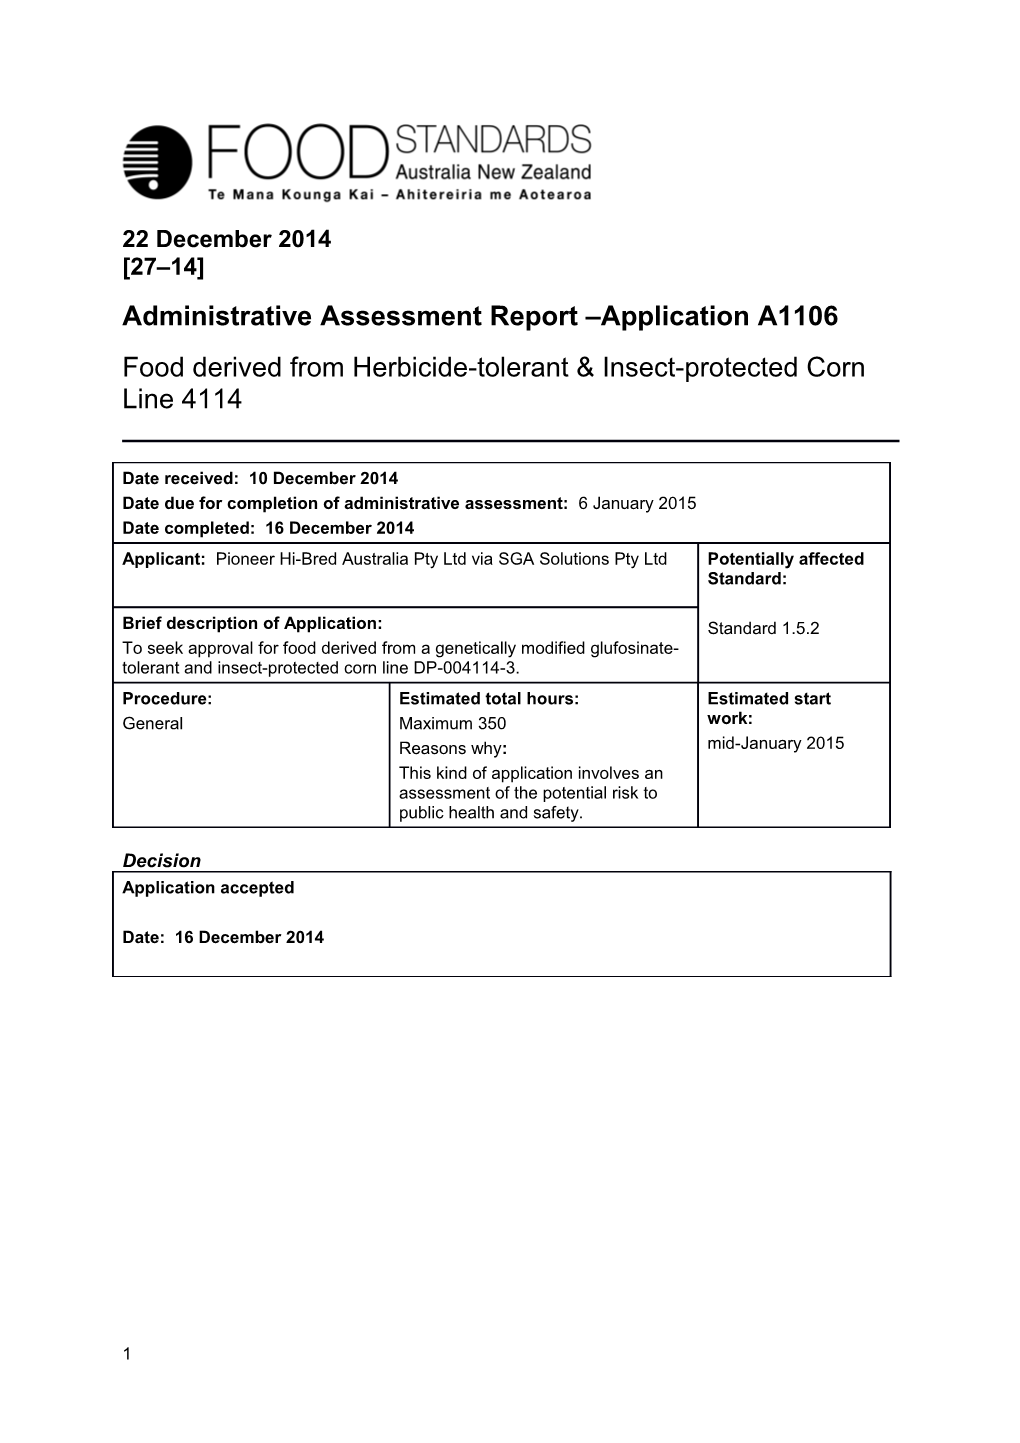 Administrative Assessment Report Application A1106